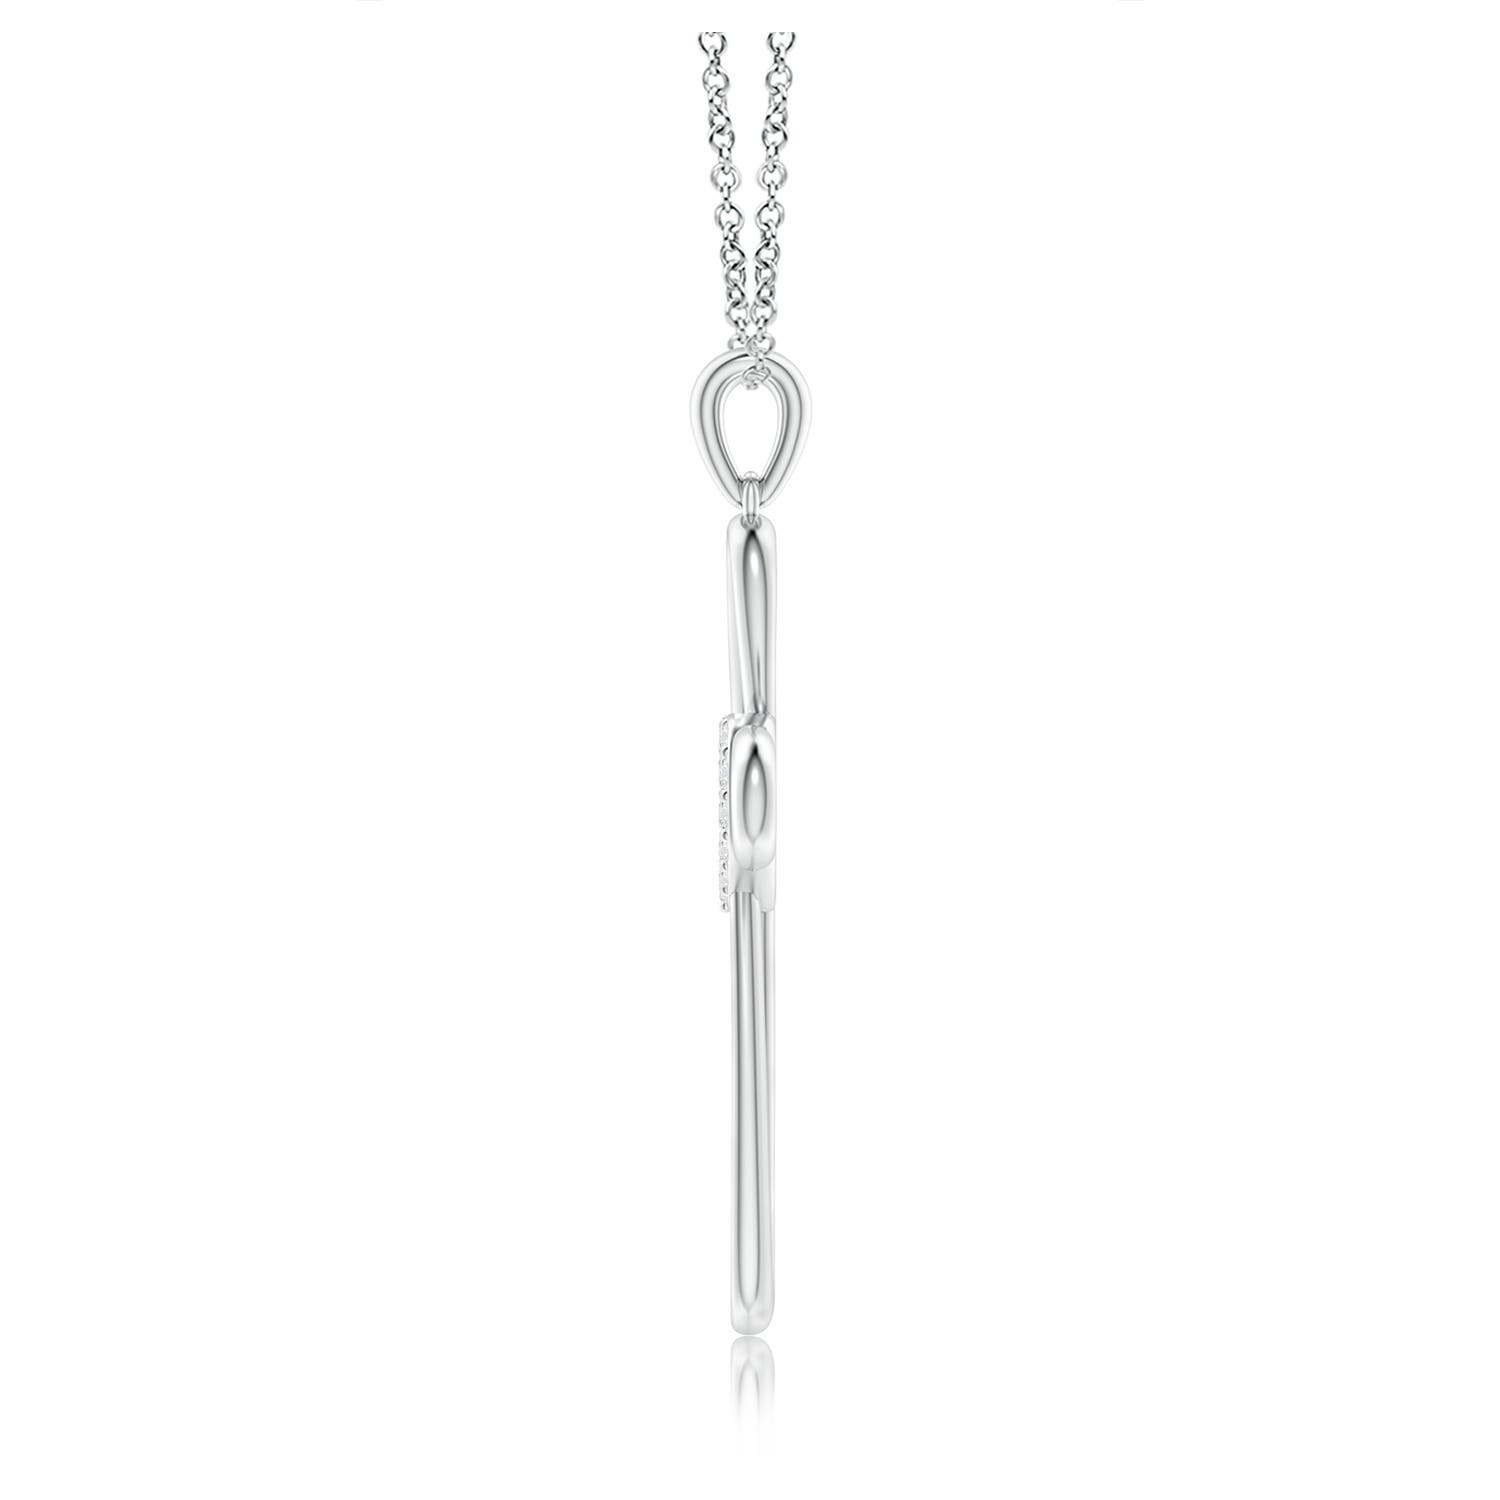 H, SI2 / 0.17 CT / 14 KT White Gold